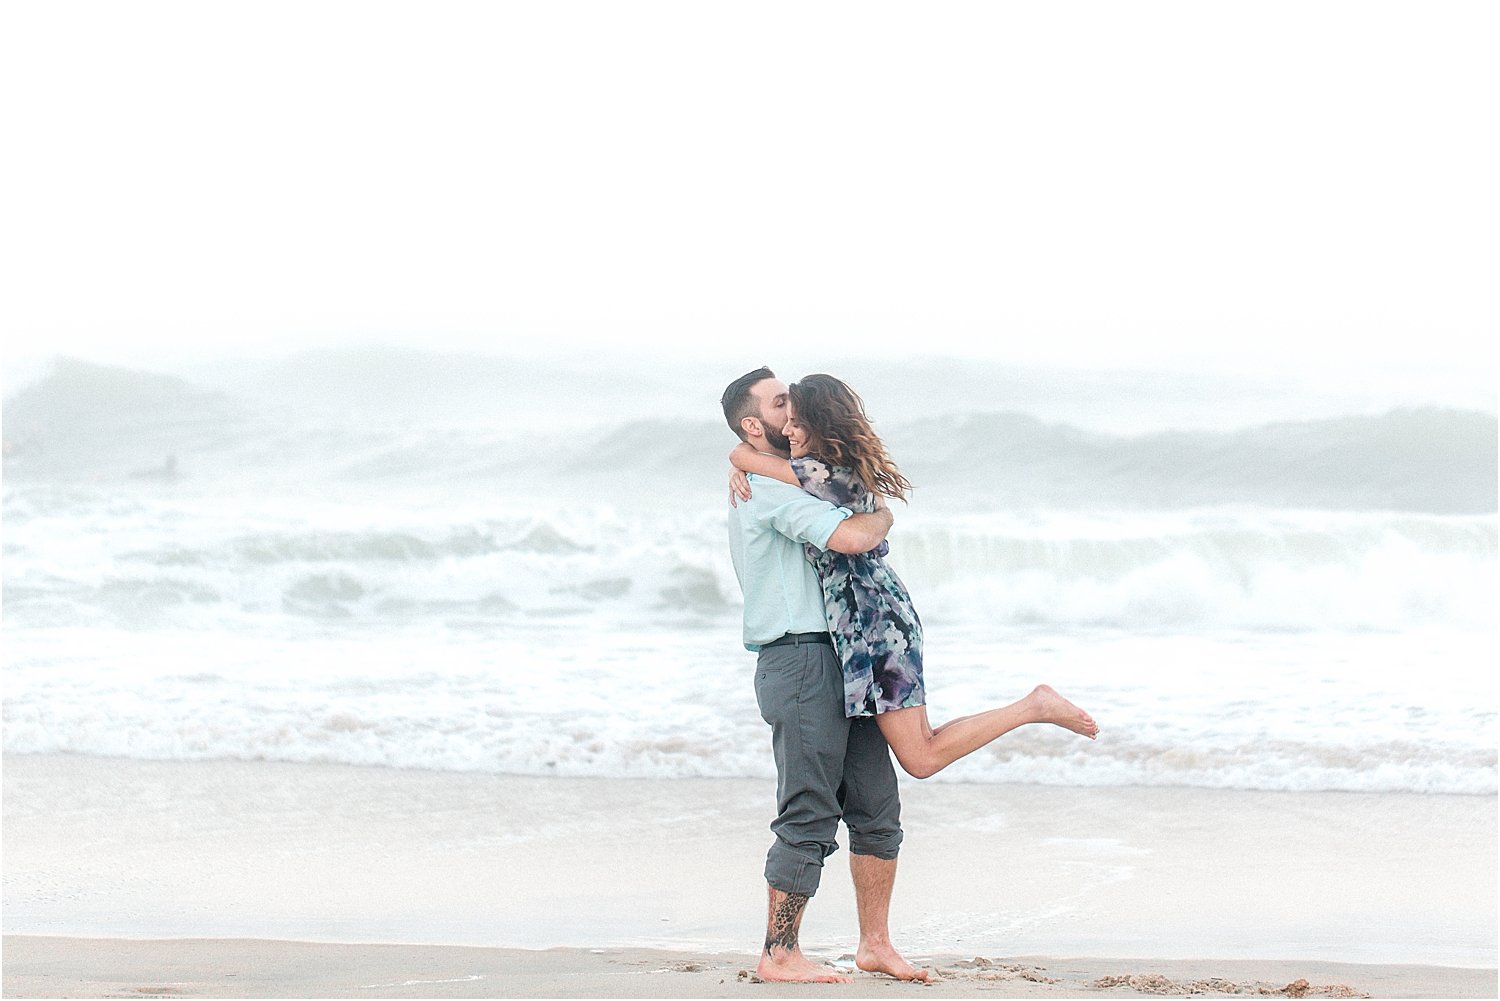 Adina and Eric- Engagement Session in St. Augustine, Florida- Jacksonville, Ponte Vedra Beach, St. Augustine, Amelia Island, Florida and Destination Fine Art Film Wedding Photography_0021.jpg